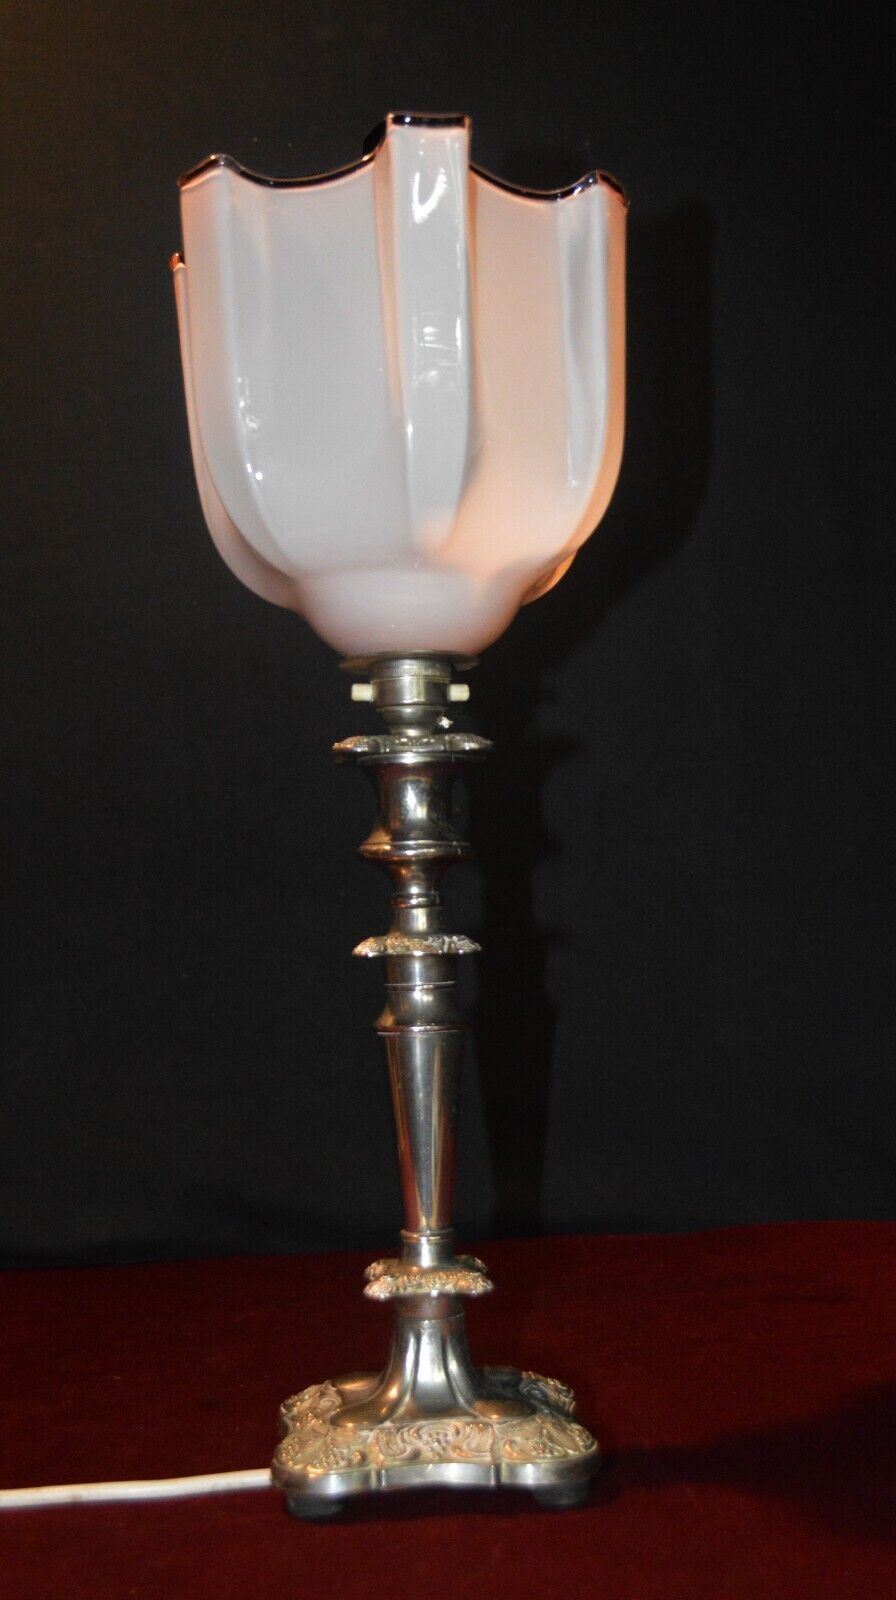 Vintage 1930s art deco silver-plated table lamp hand-moulded tinted glass shade